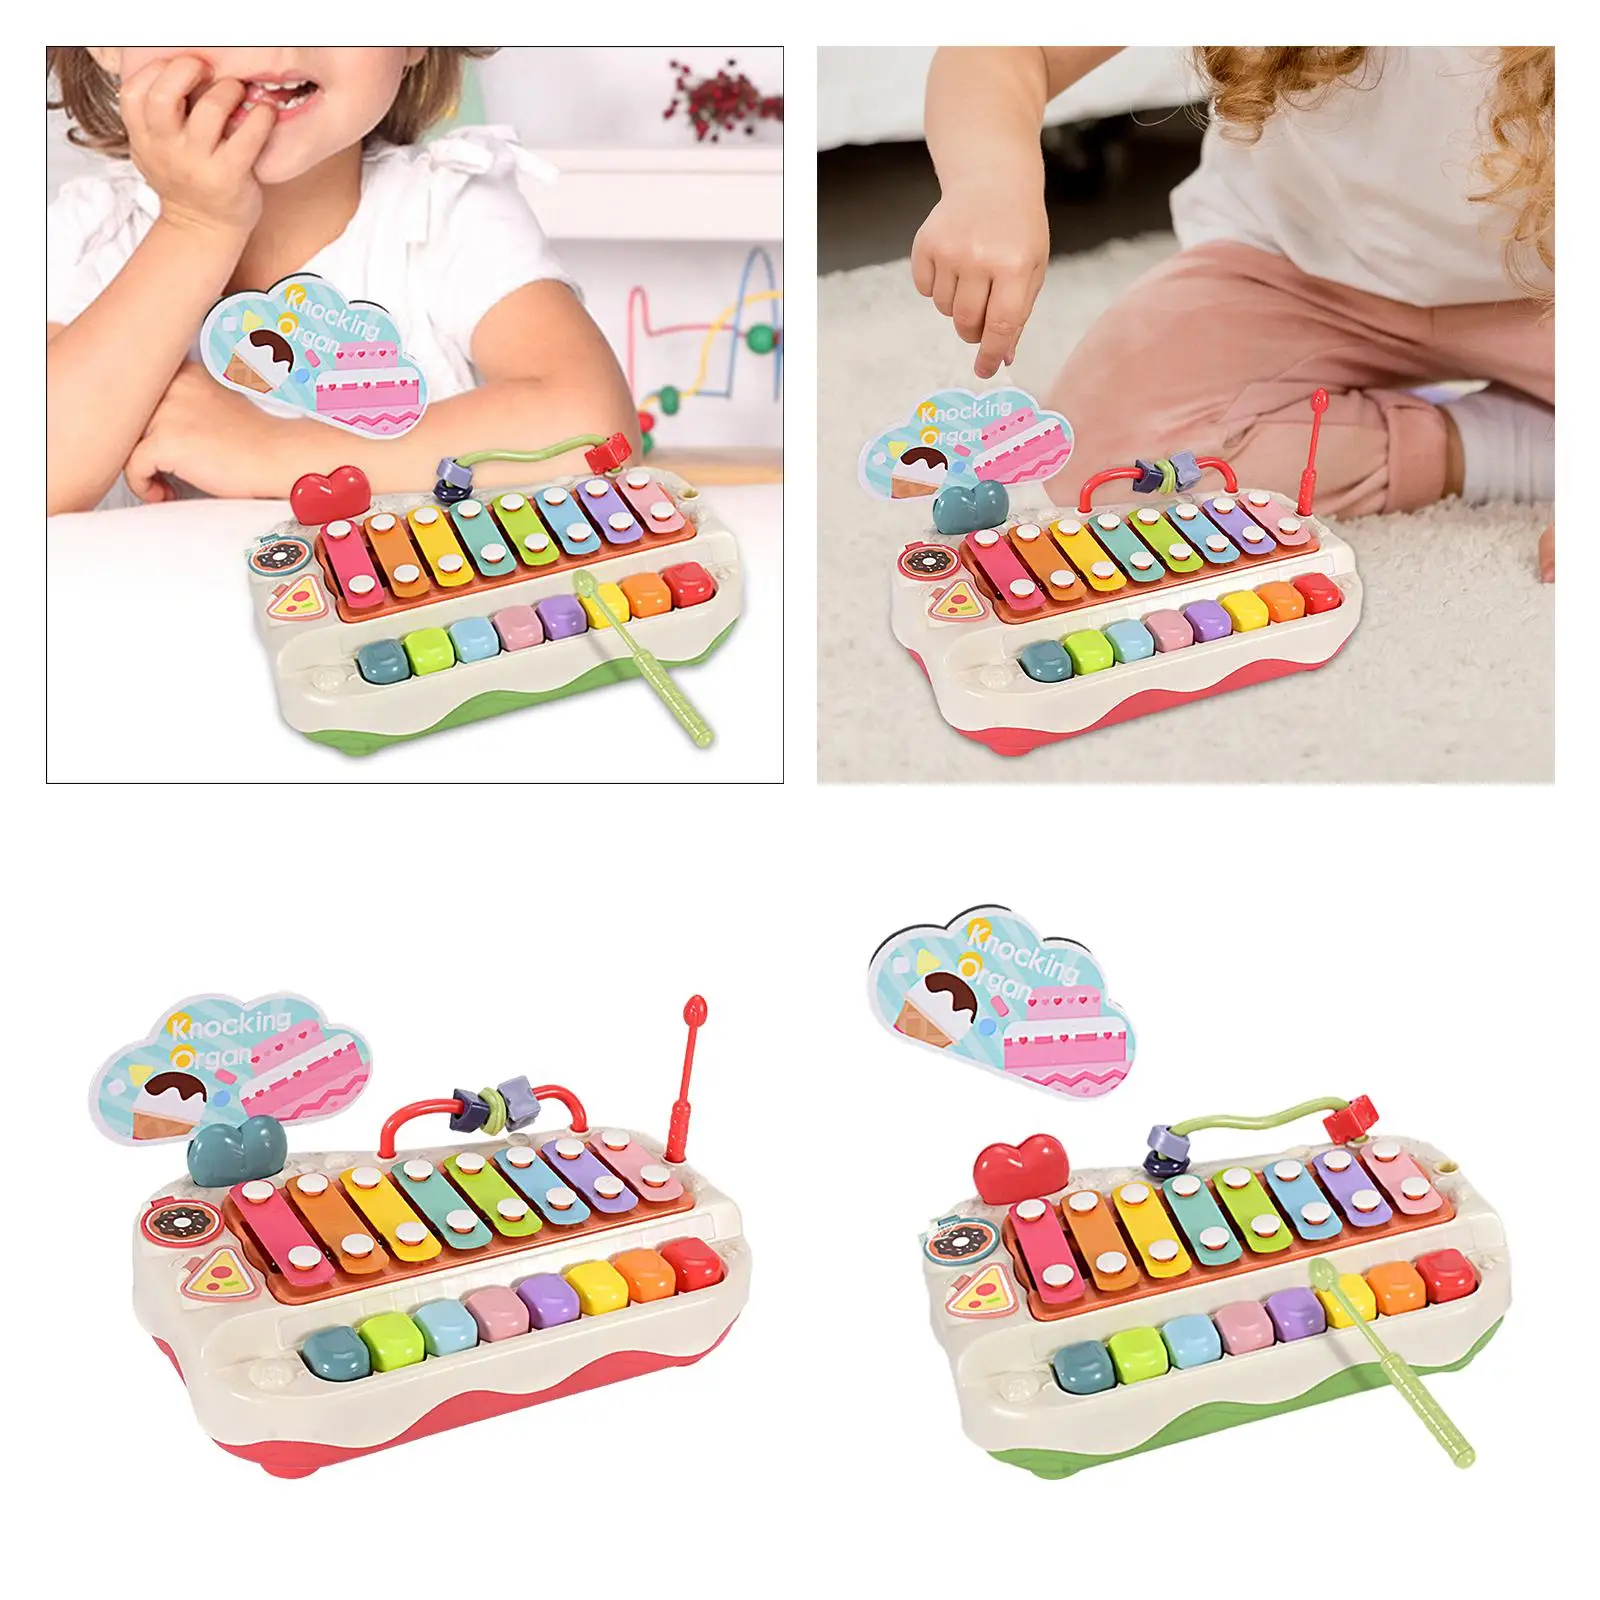 Kids Musical Toy Educational Colorful Preschool Eight Tone Piano Keyboard Toy for Baby 1 2 3 Years Old Kids Holiday Gifts